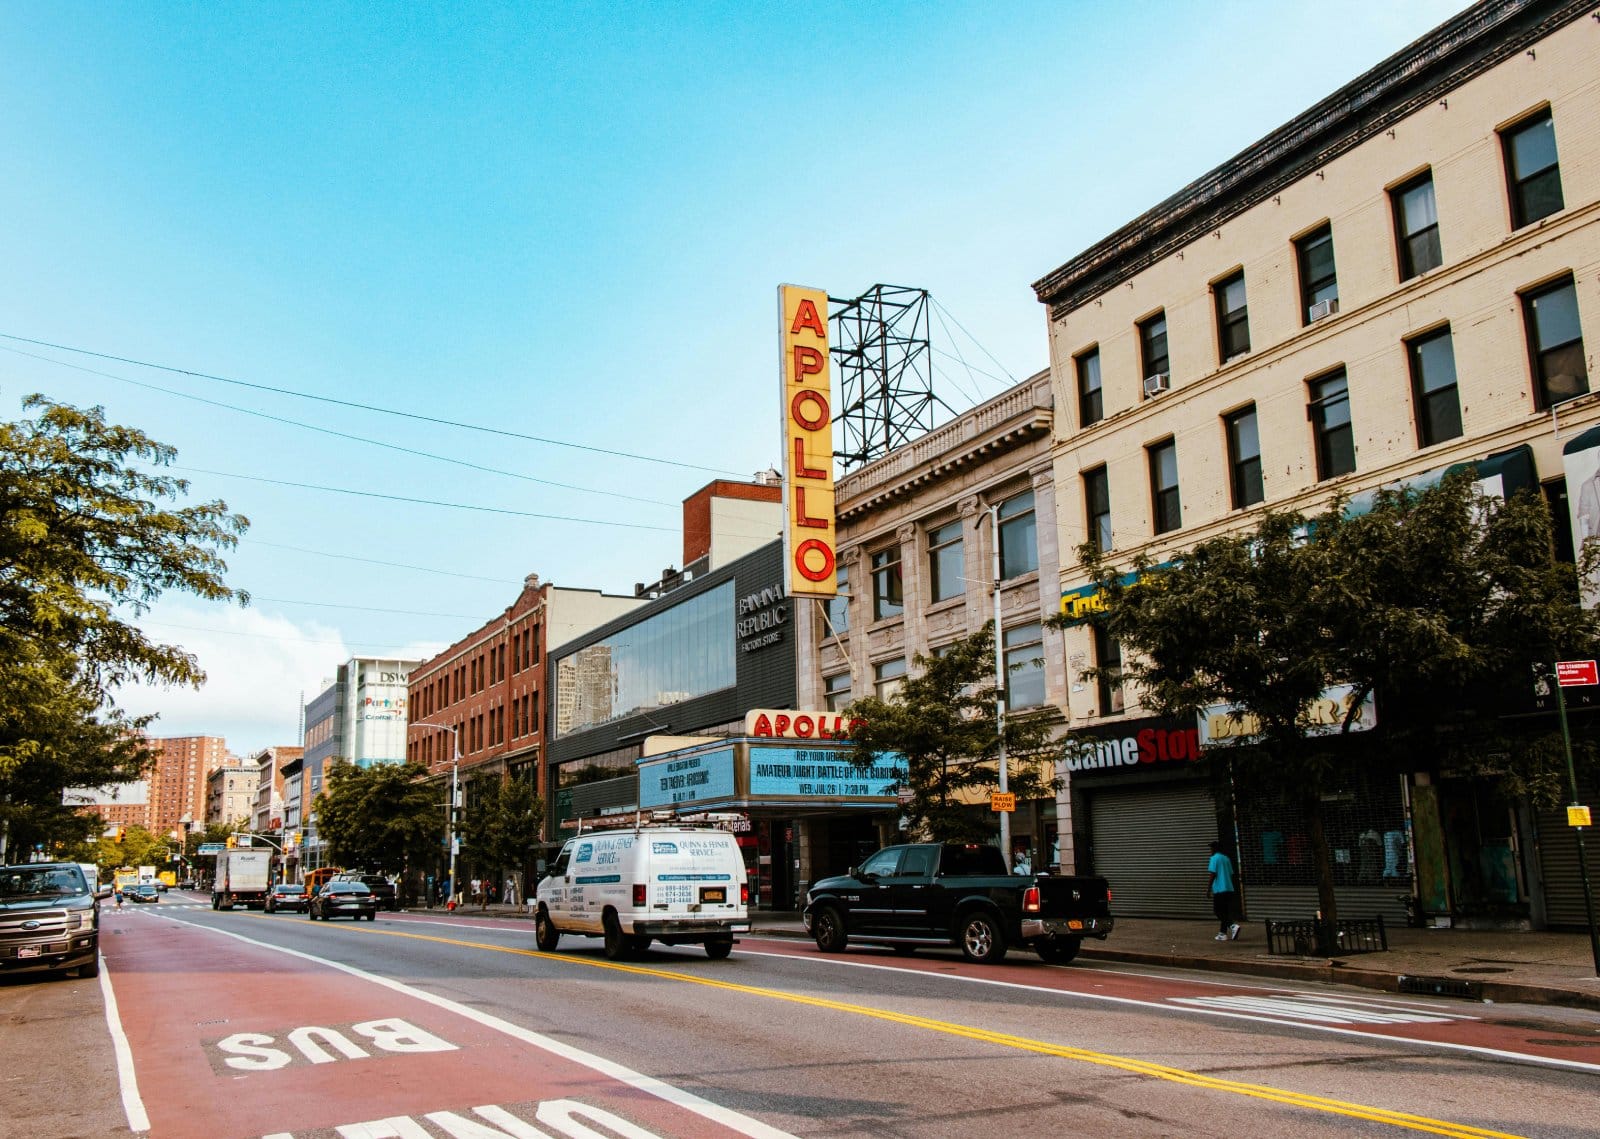 <p class="wp-caption-text">Image Credit: Pexels / Phil Evenden</p>  <p><span>The Apollo Theater in Harlem is an iconic venue that has launched the careers of countless African American artists, including James Brown, Ella Fitzgerald, and Michael Jackson. The Apollo’s Amateur Night is a historic event where new talents are discovered, continuing the theater’s legacy as a cradle of musical innovation.</span></p>